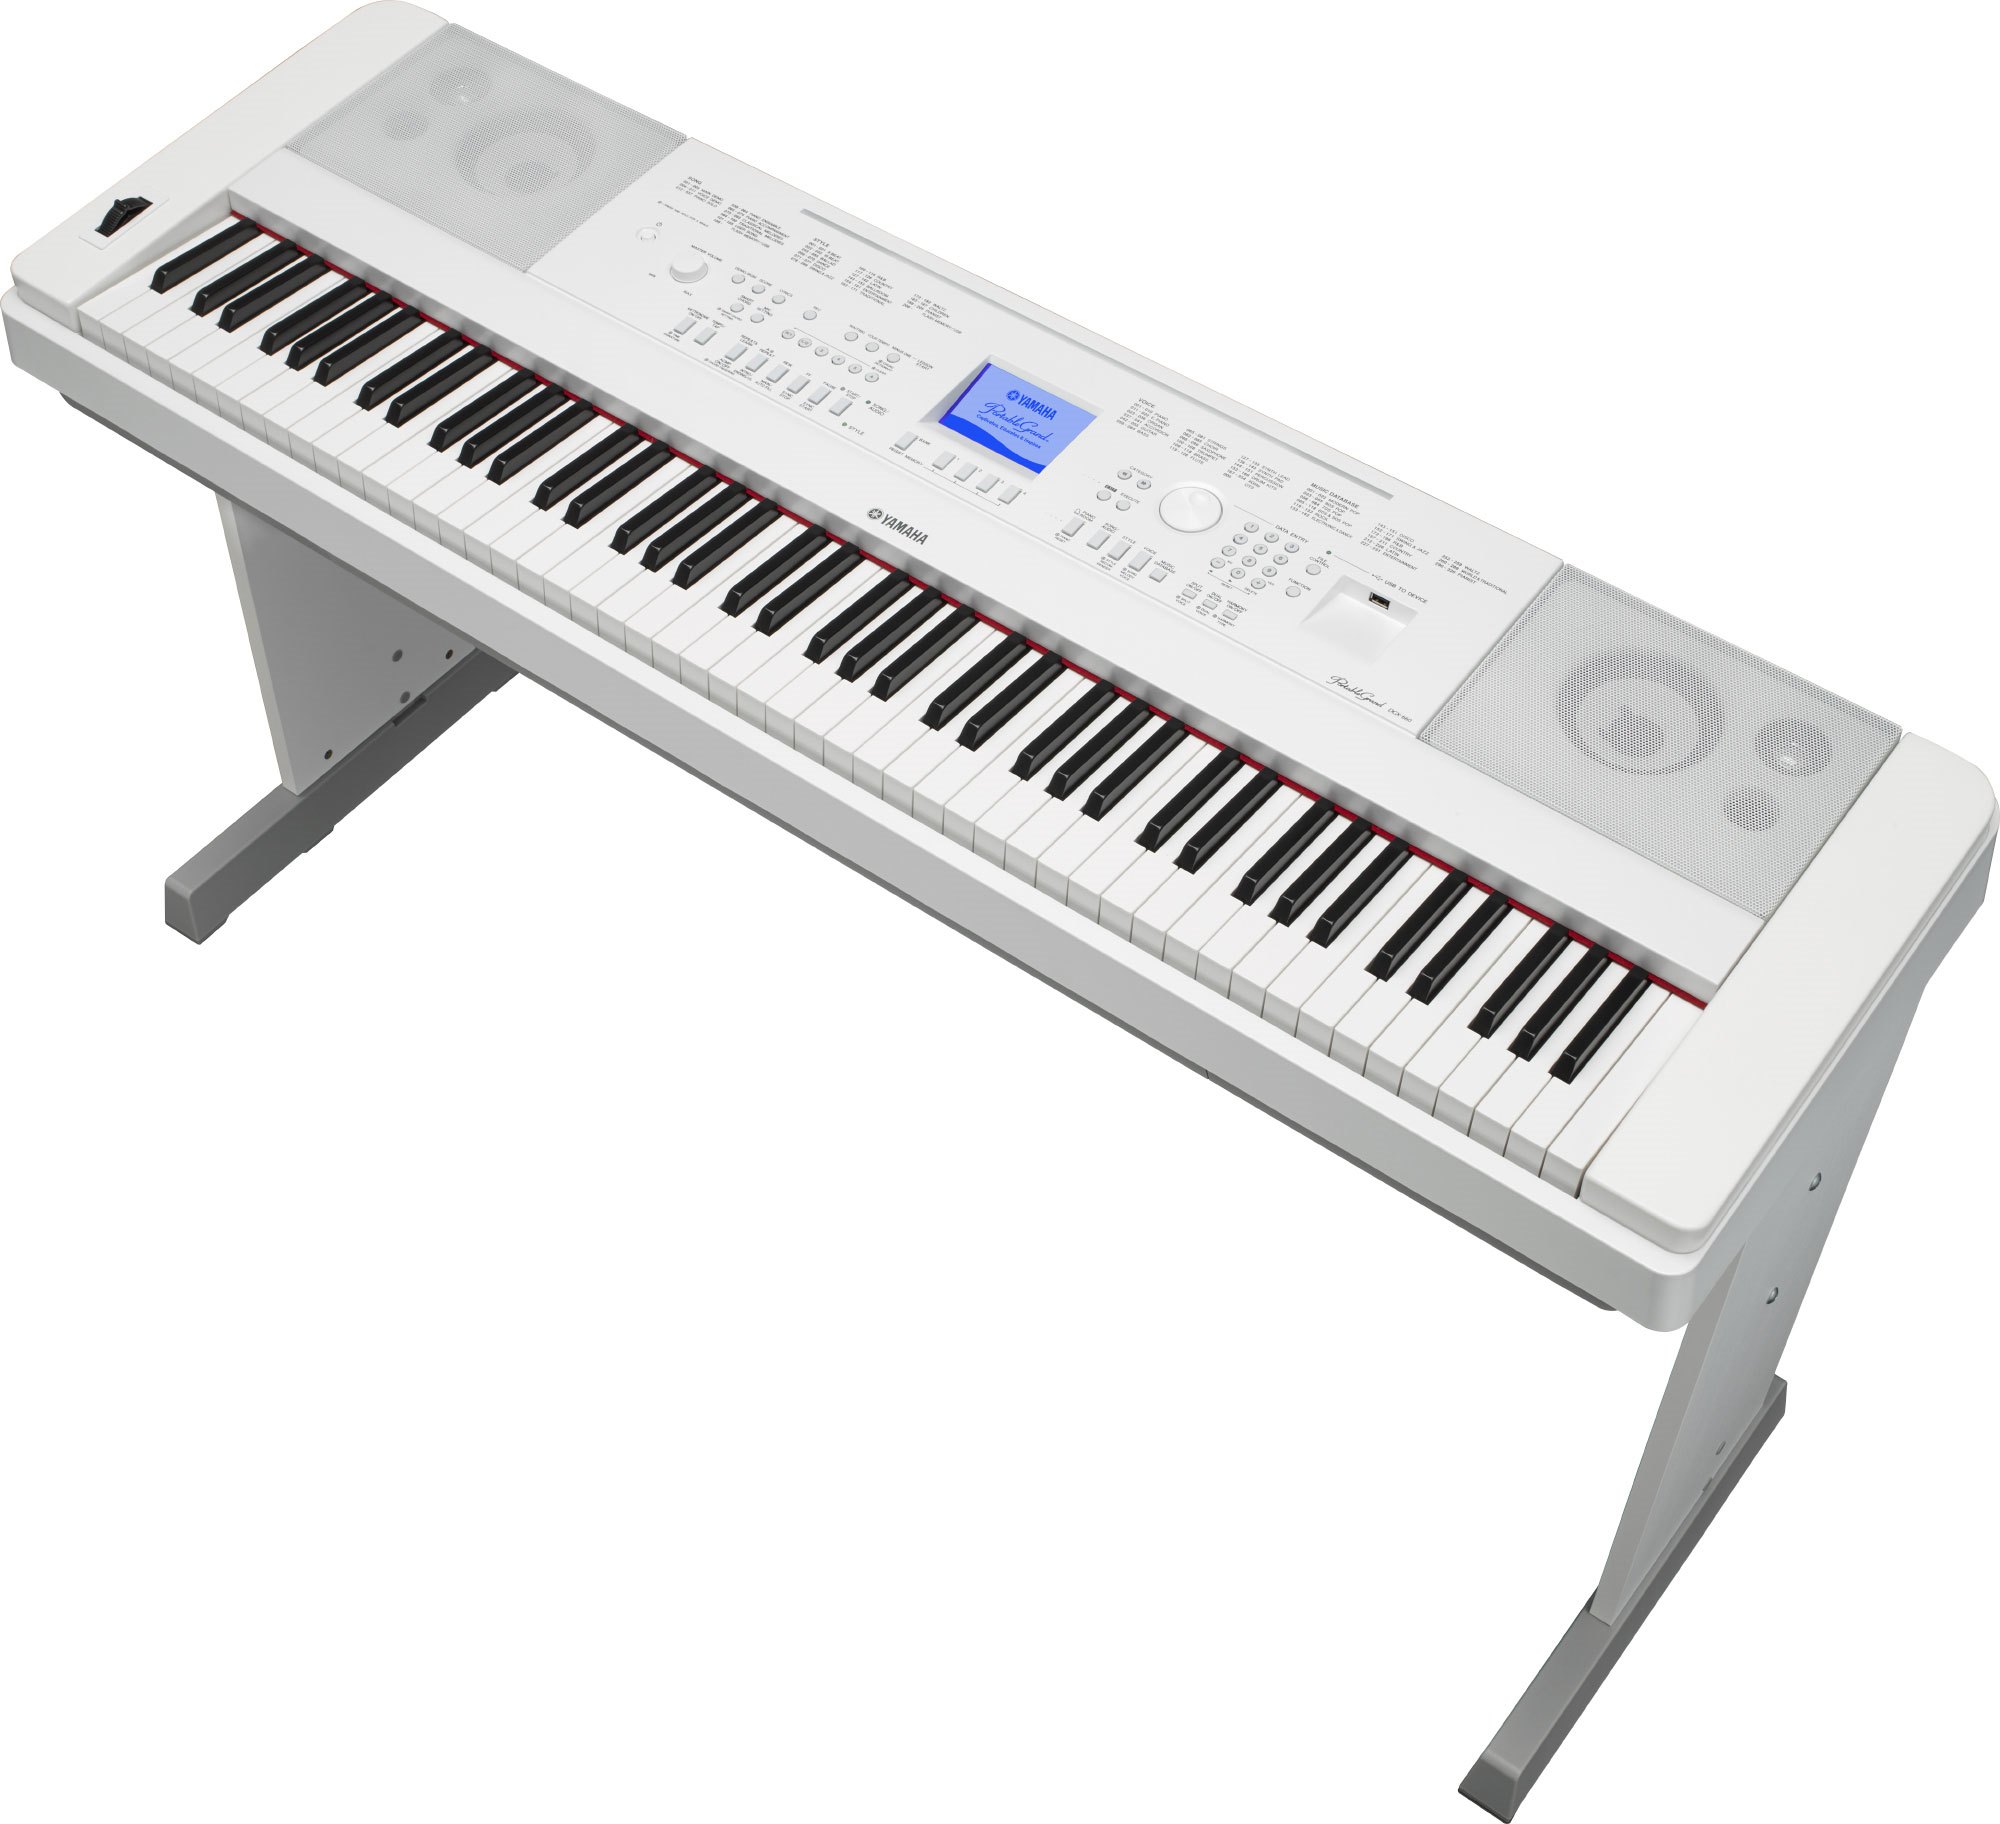 DGX-660 - Overview - Portable Grand - Pianos - Musical Instruments 